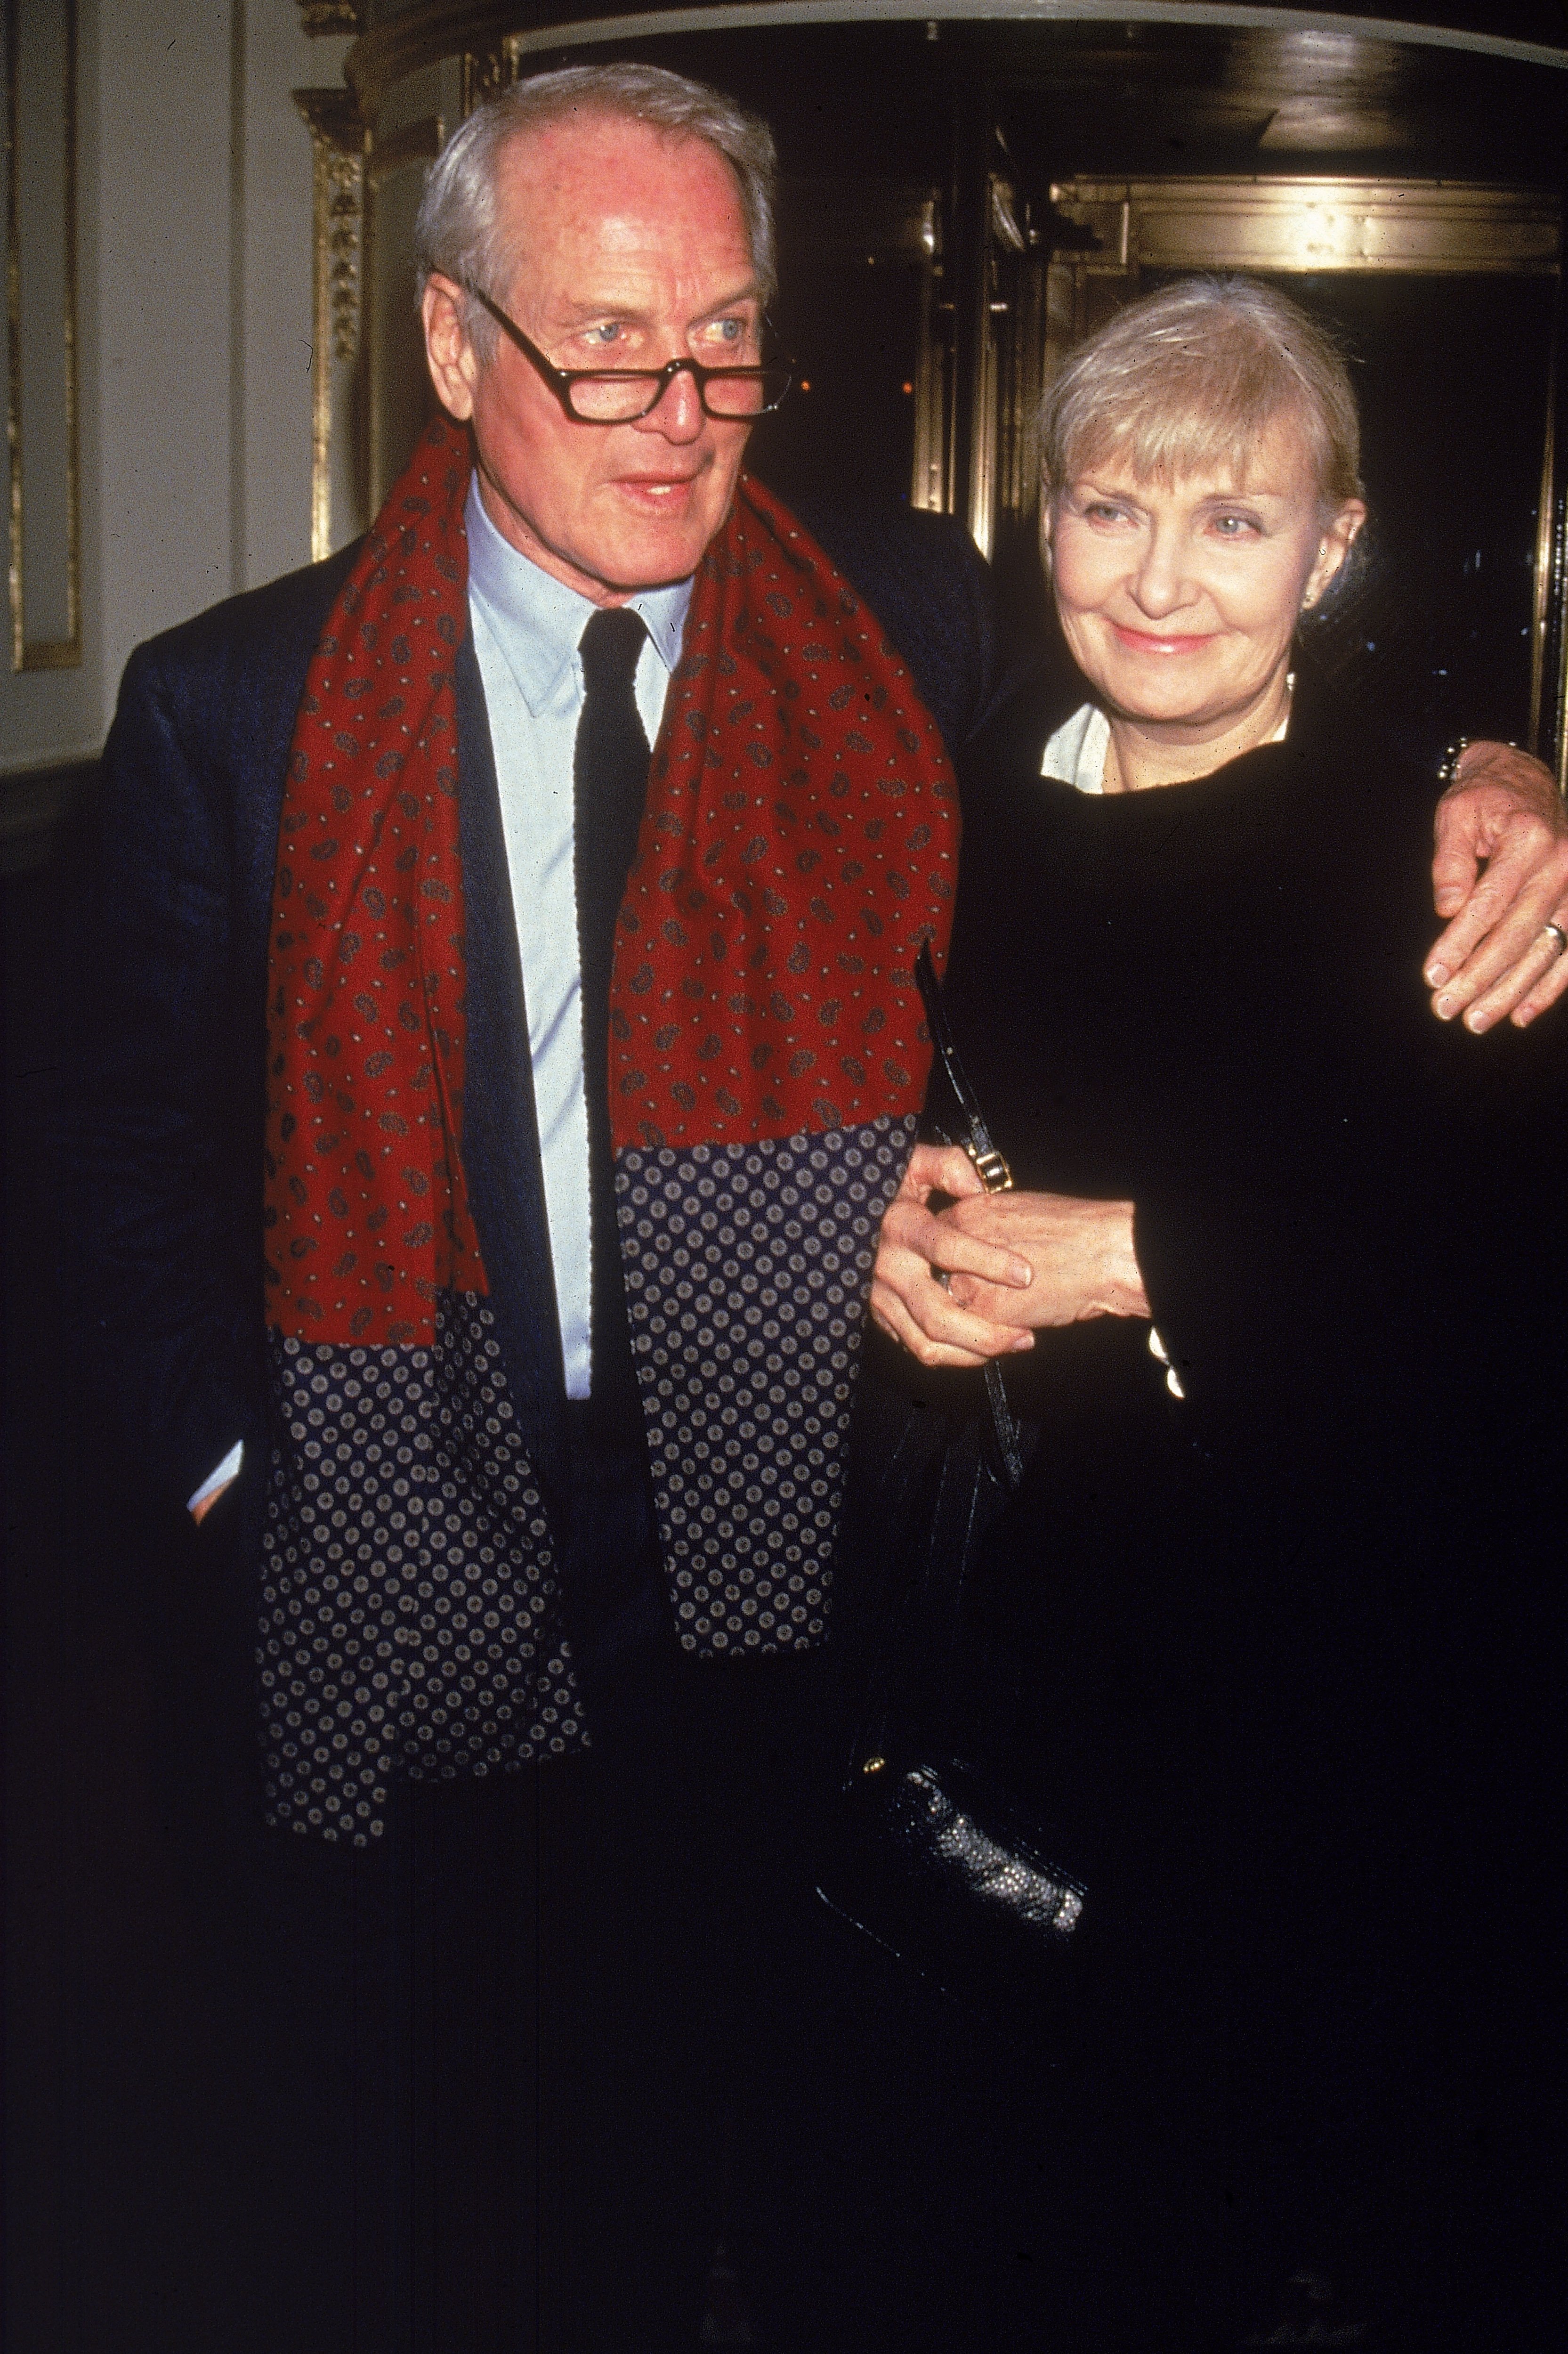 Paul Newman and Joanne Woodward attend the premiere of the film "Nobody's Fool" in 1994. | Photo: Getty Images